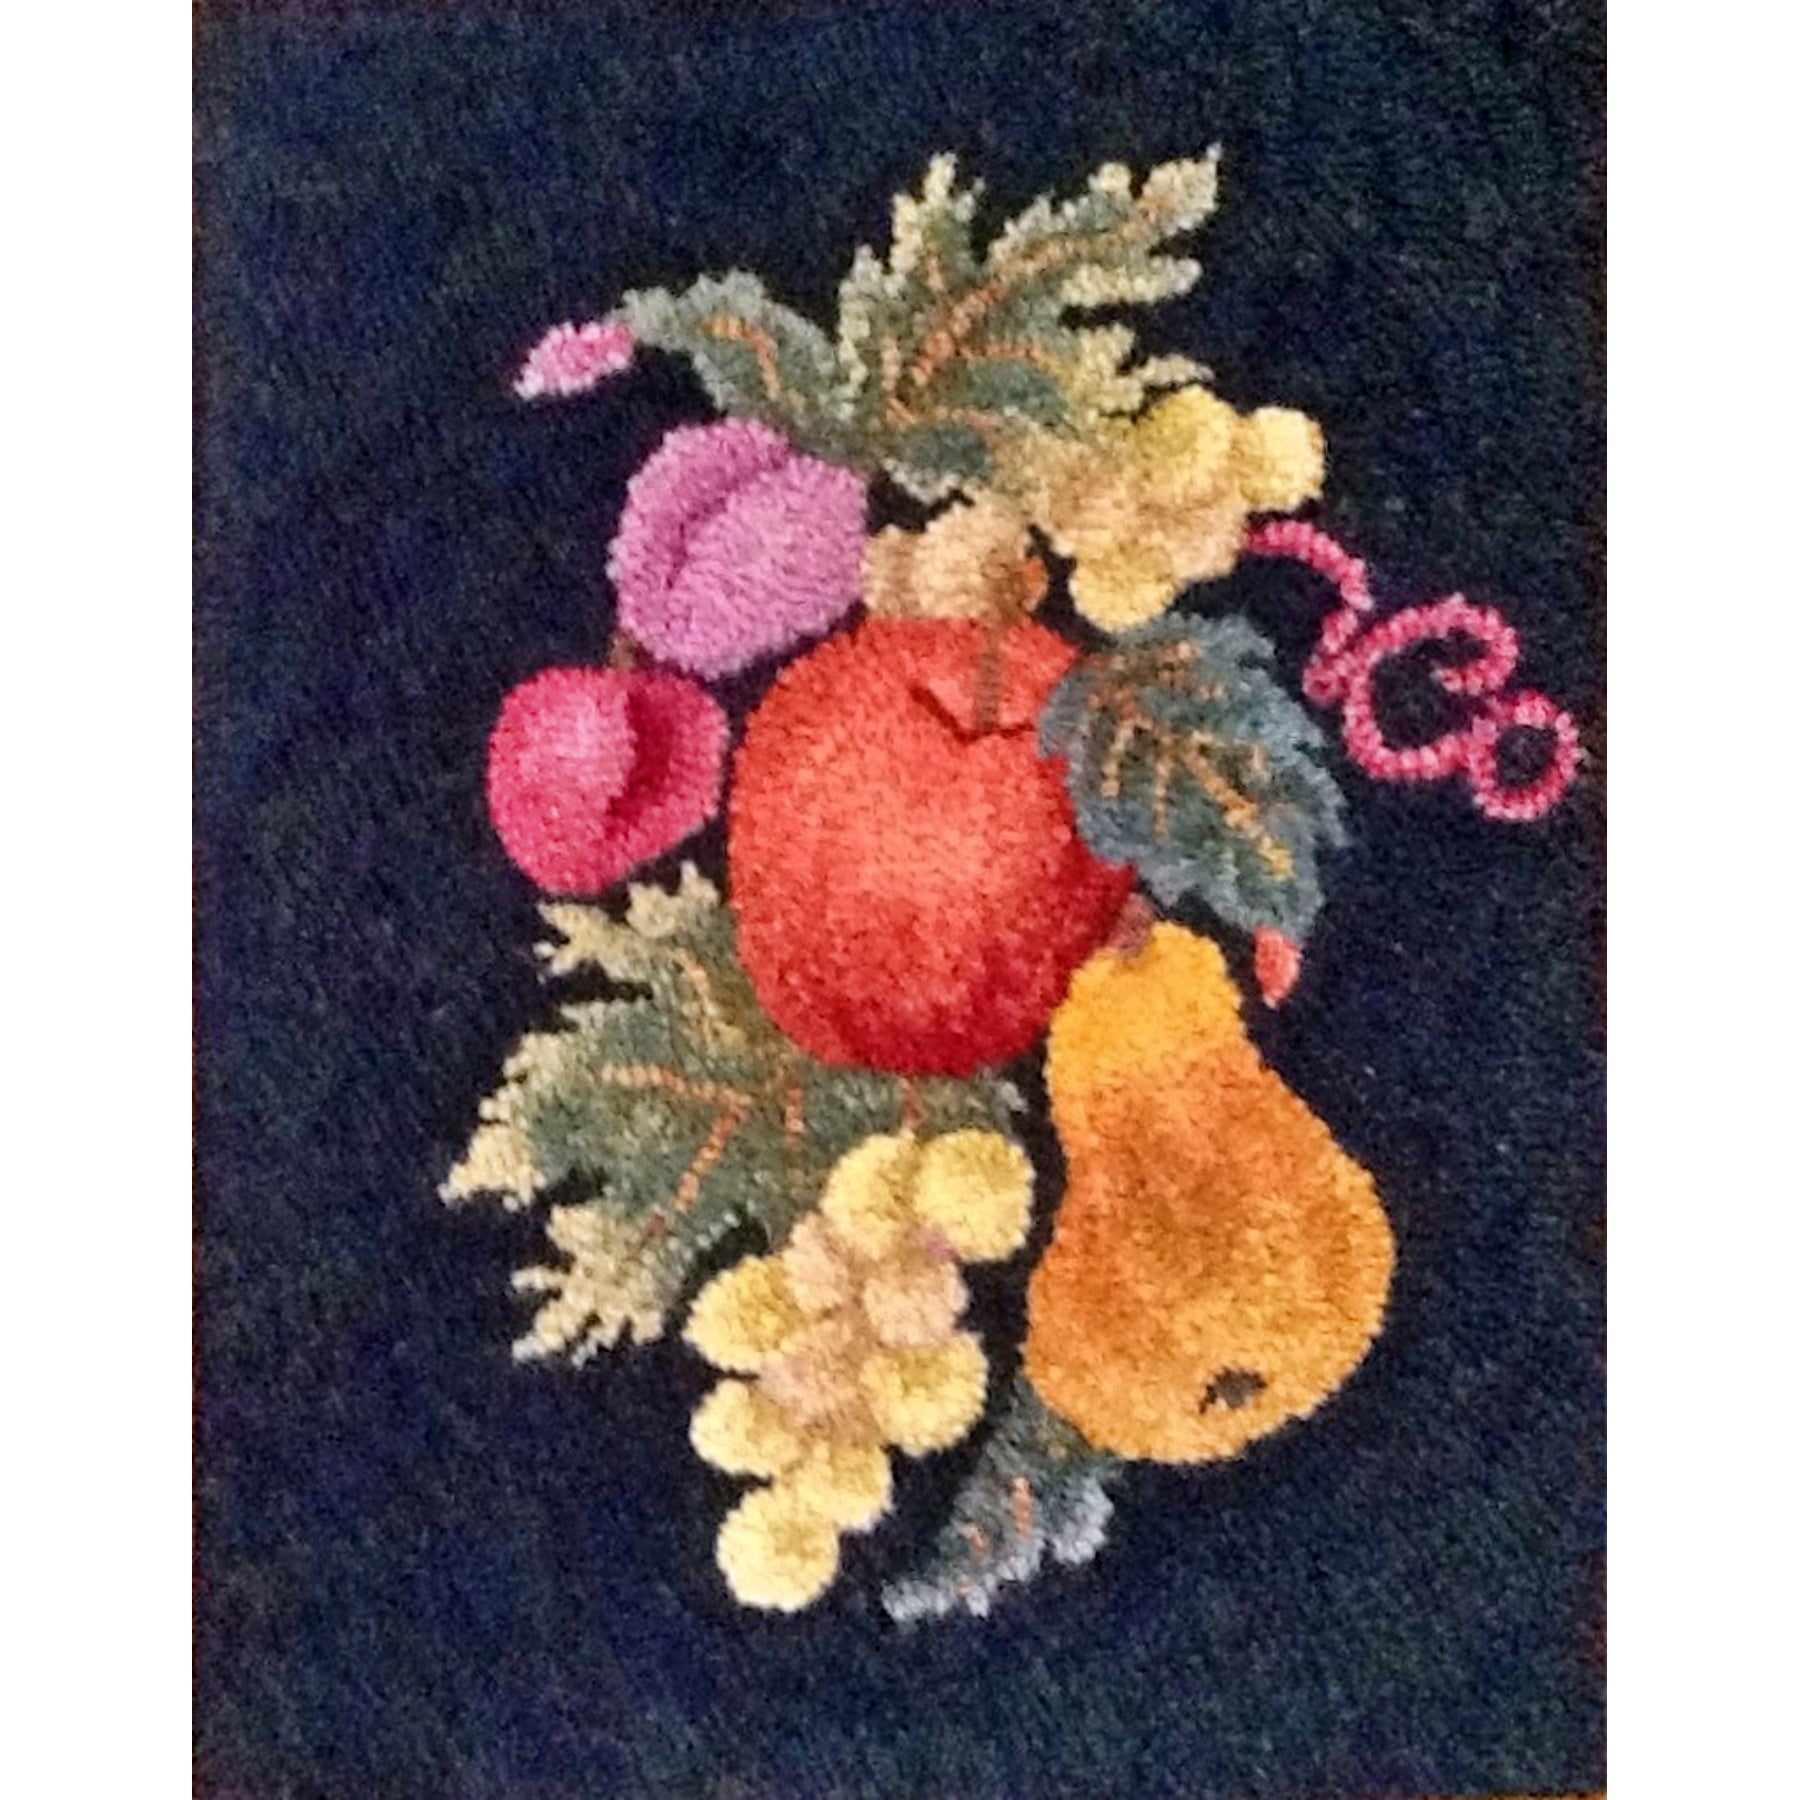 Fruit, rug hooked by Vivily Powers